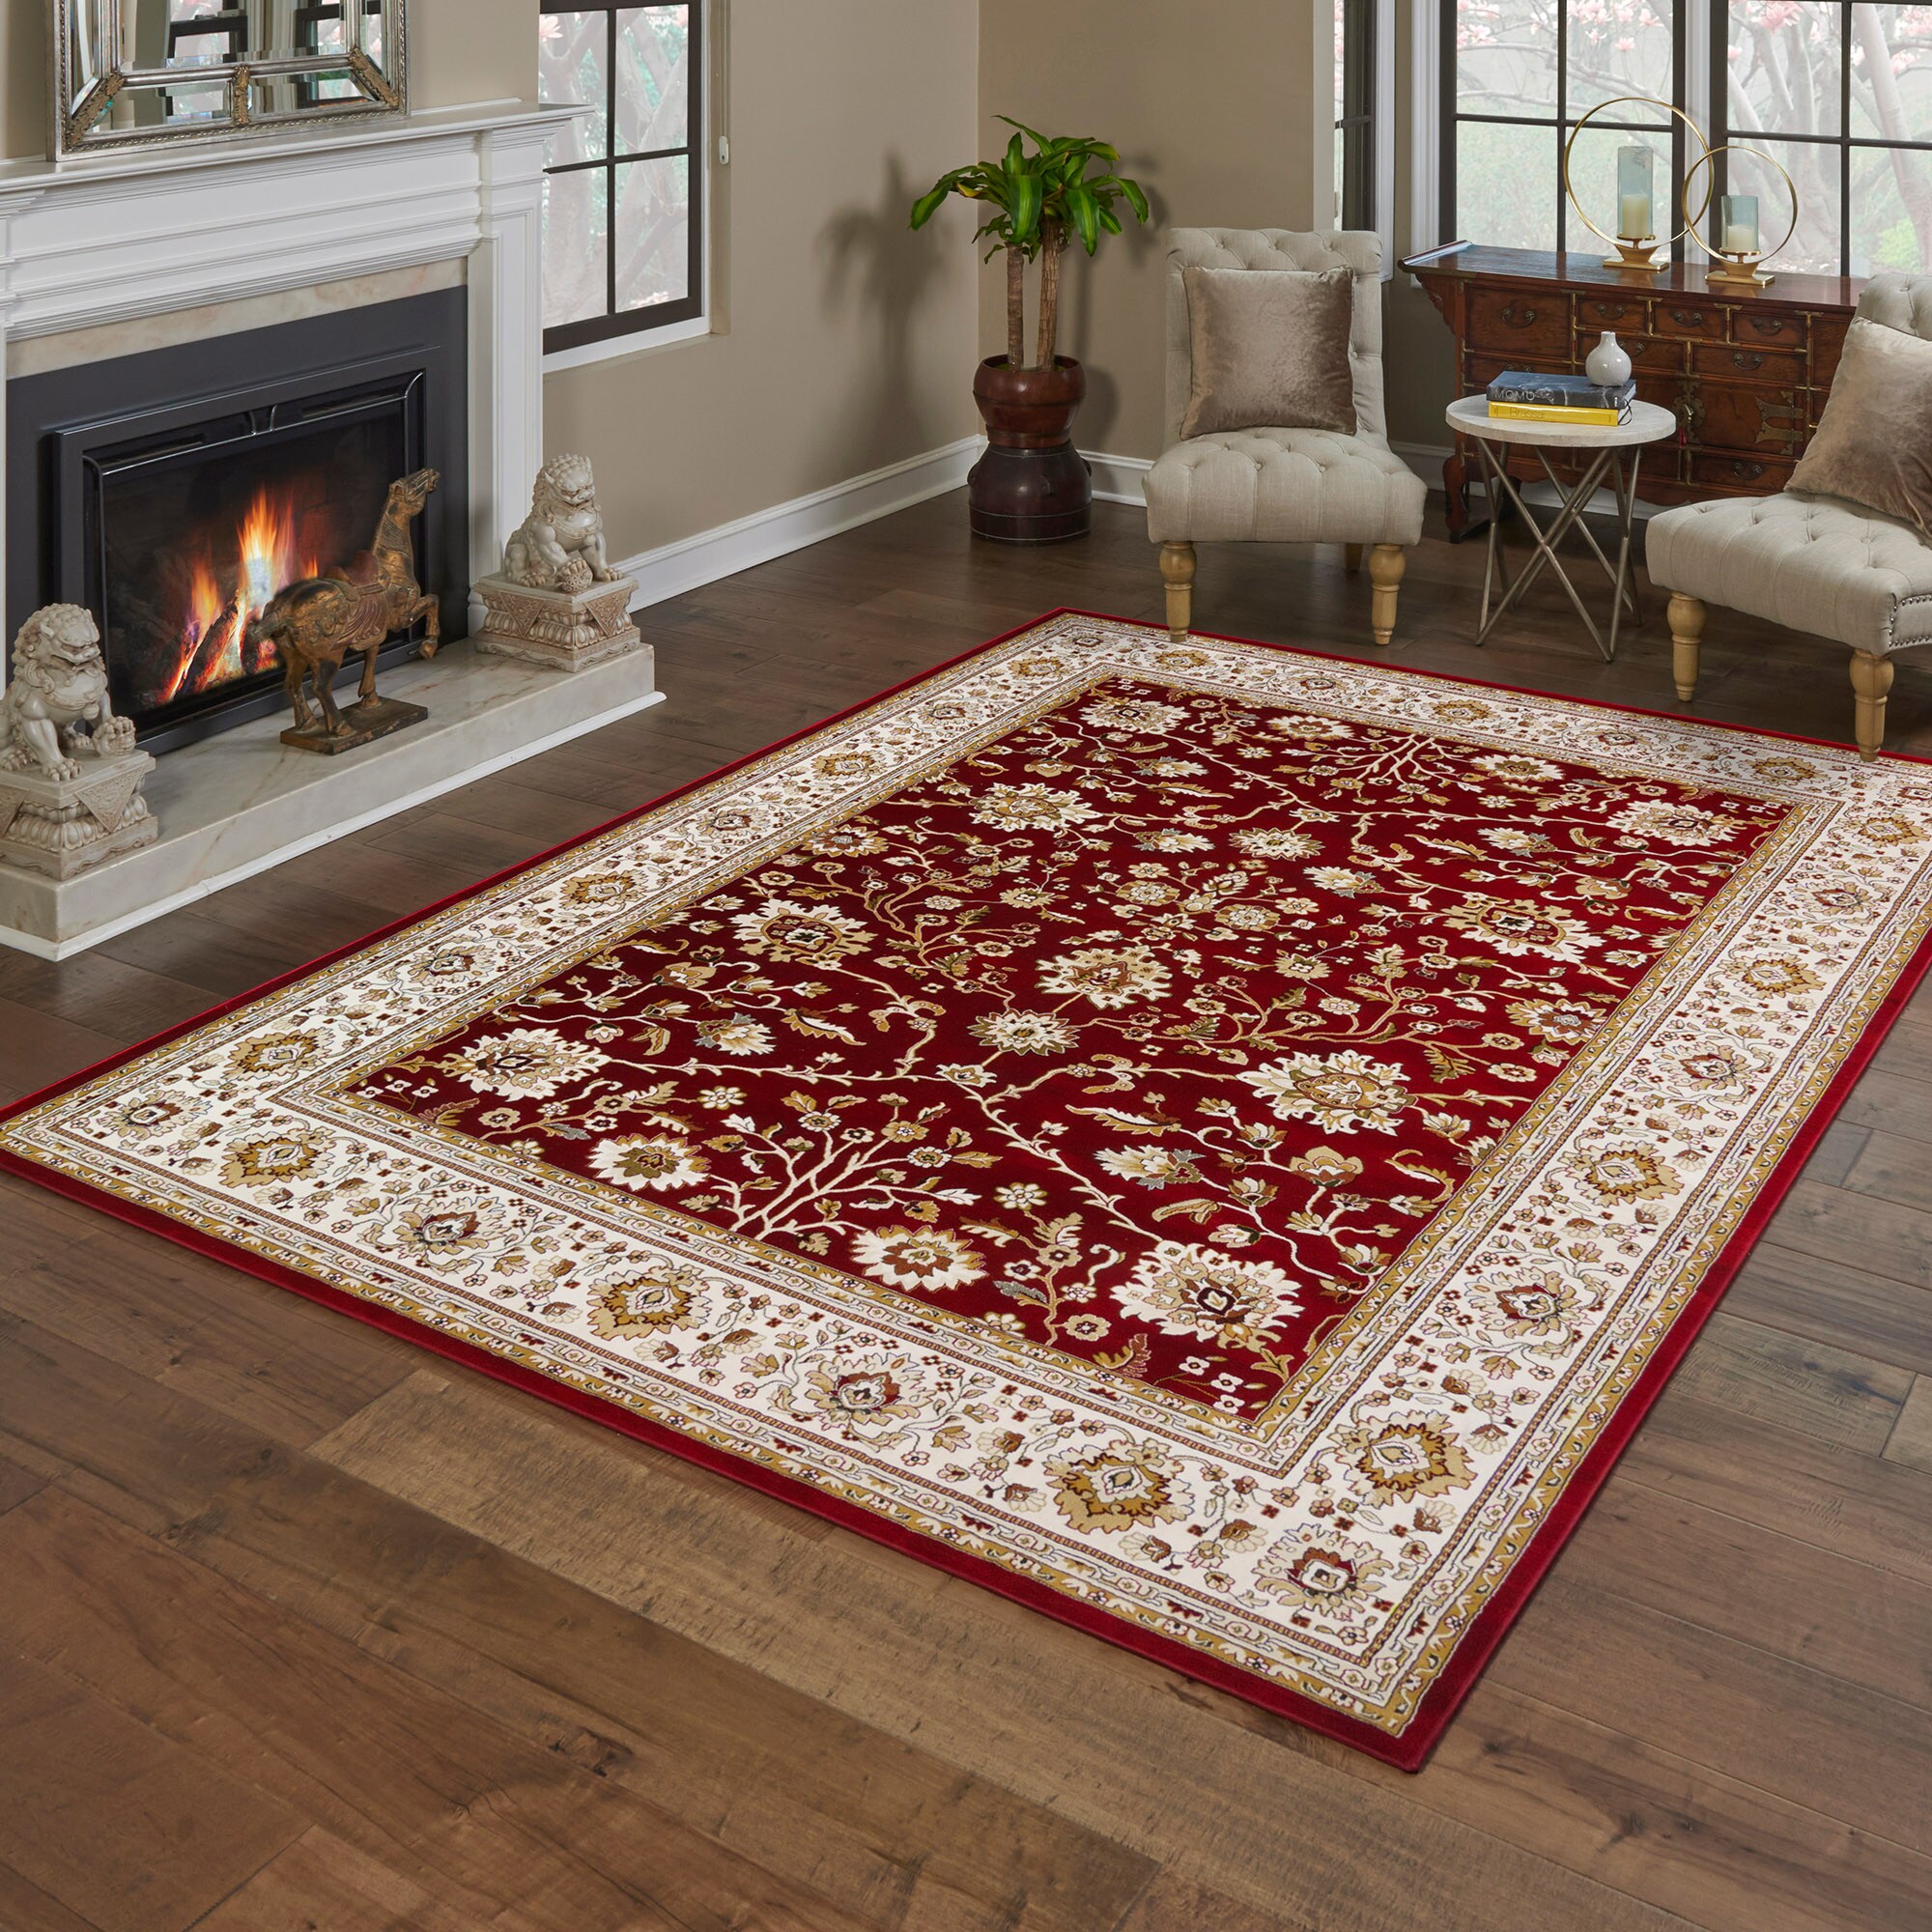 GERTMENIAN Majestic 8 x 10 Red Indoor Border Area Rug in the Rugs ...